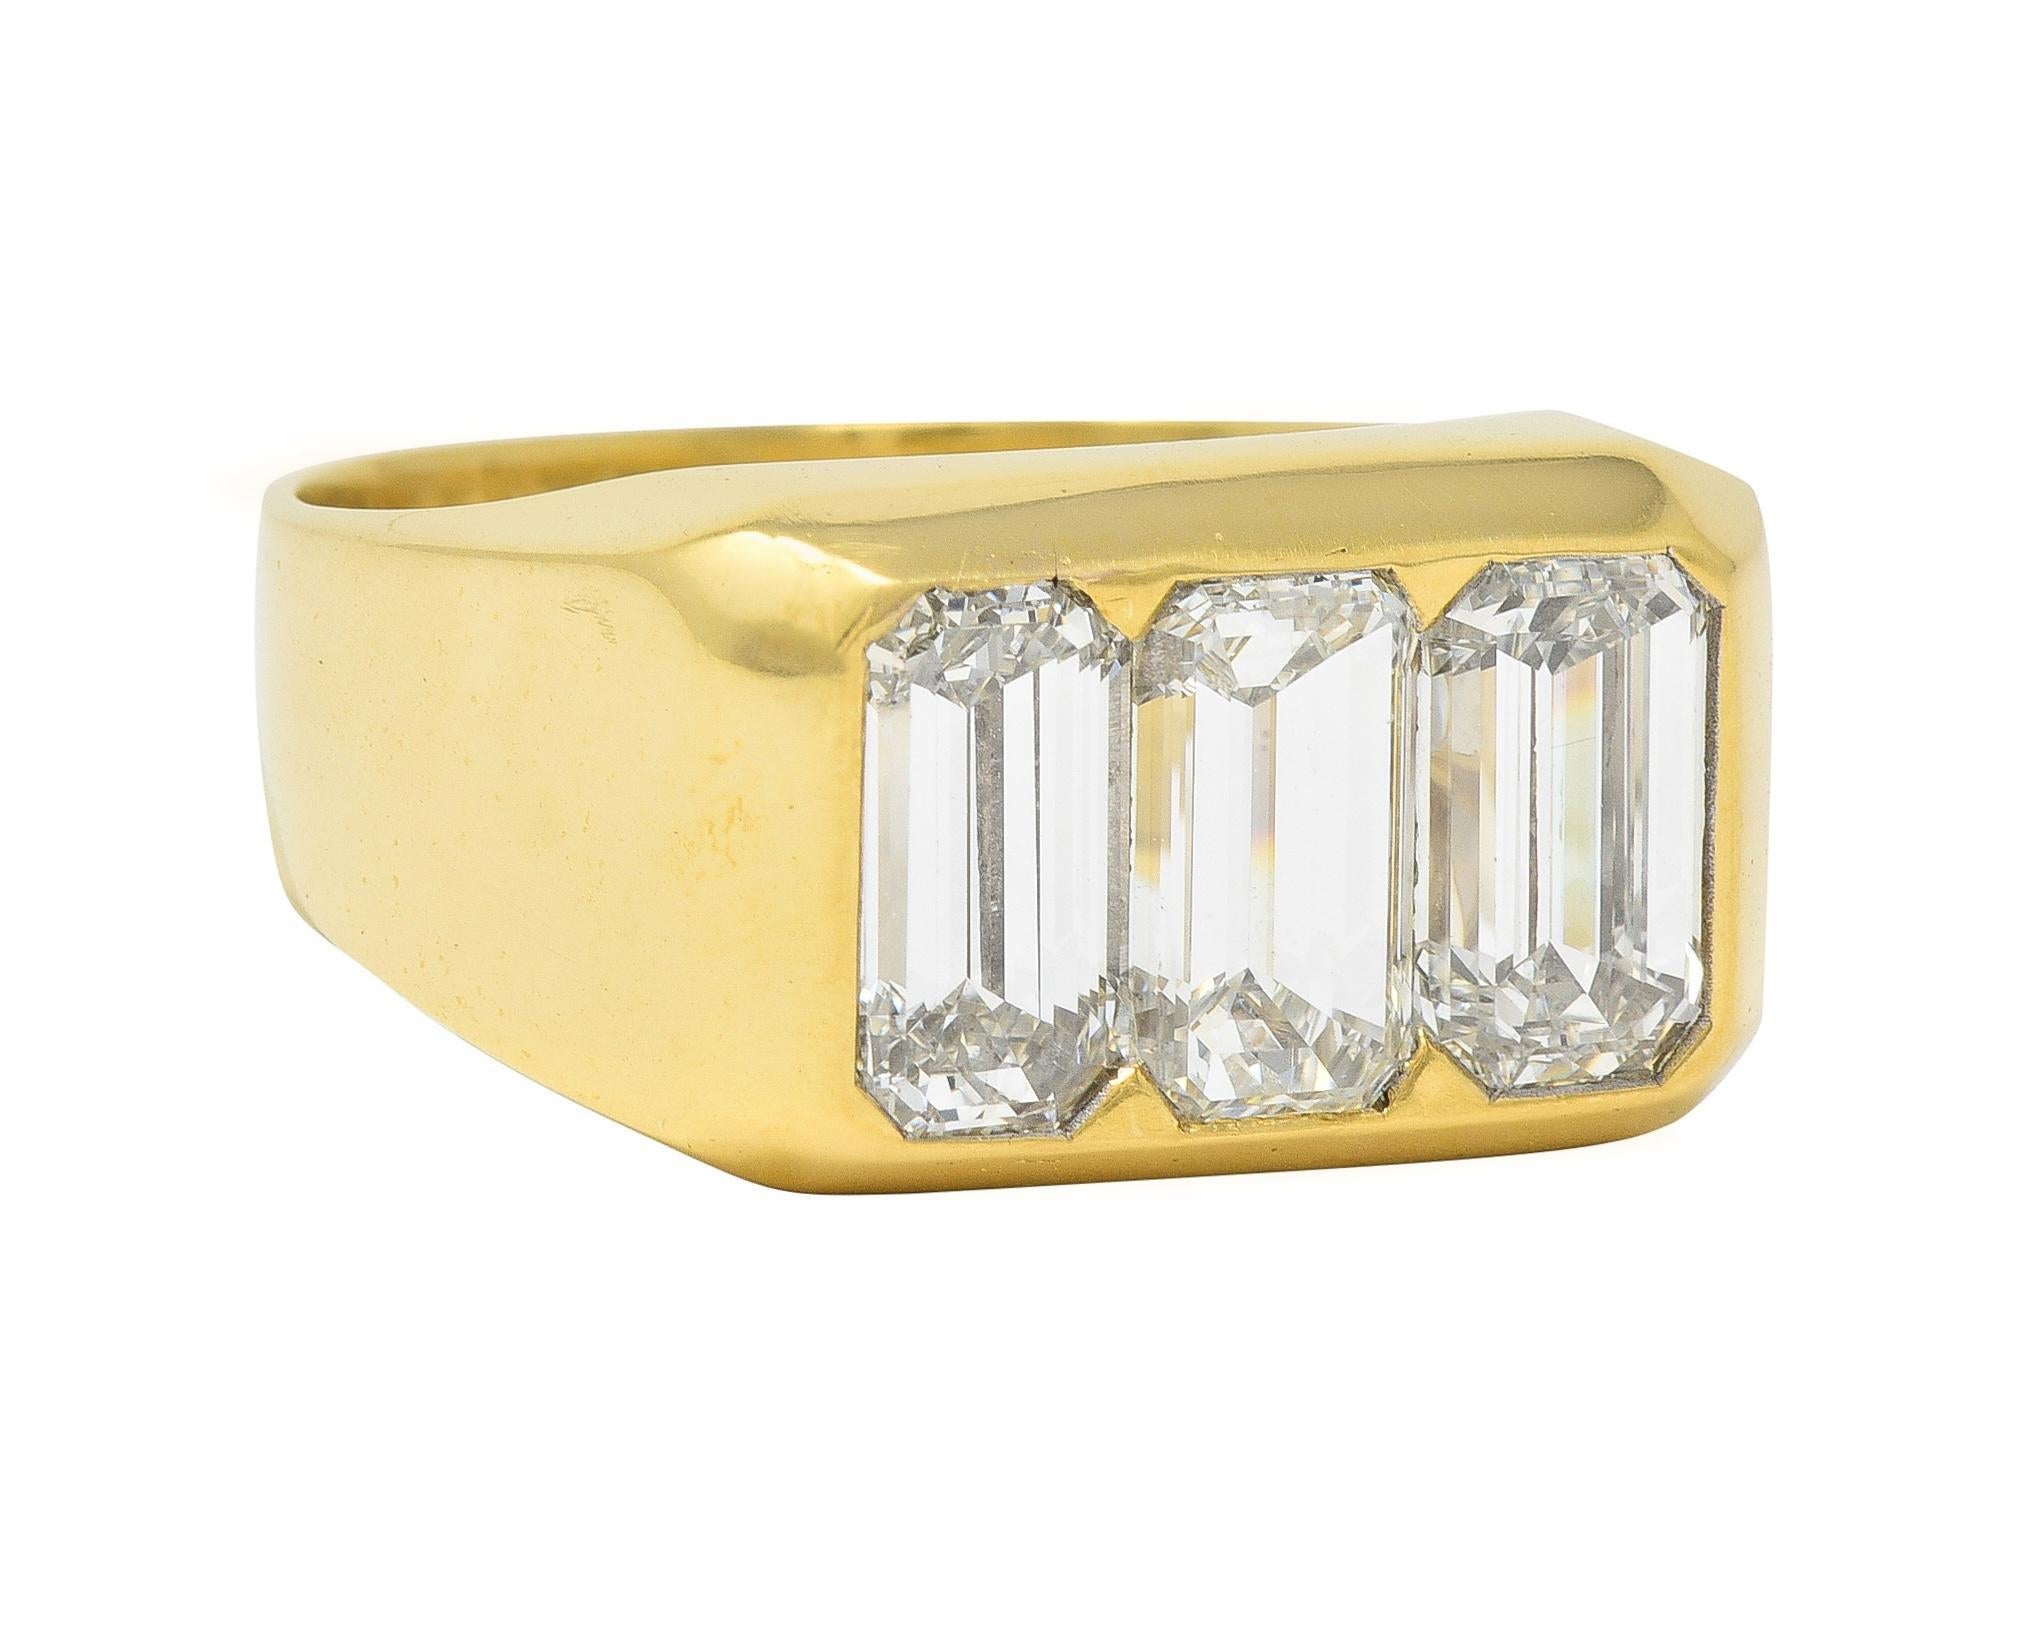 Centering three emerald cut diamonds flush set east to west in rectangular form head
Weighing approximately 3.48 carats total - H color with VS2 clarity
Completed by subtle facet motif surround
With high polish finish
Tested as 18 karat gold 
Circa: